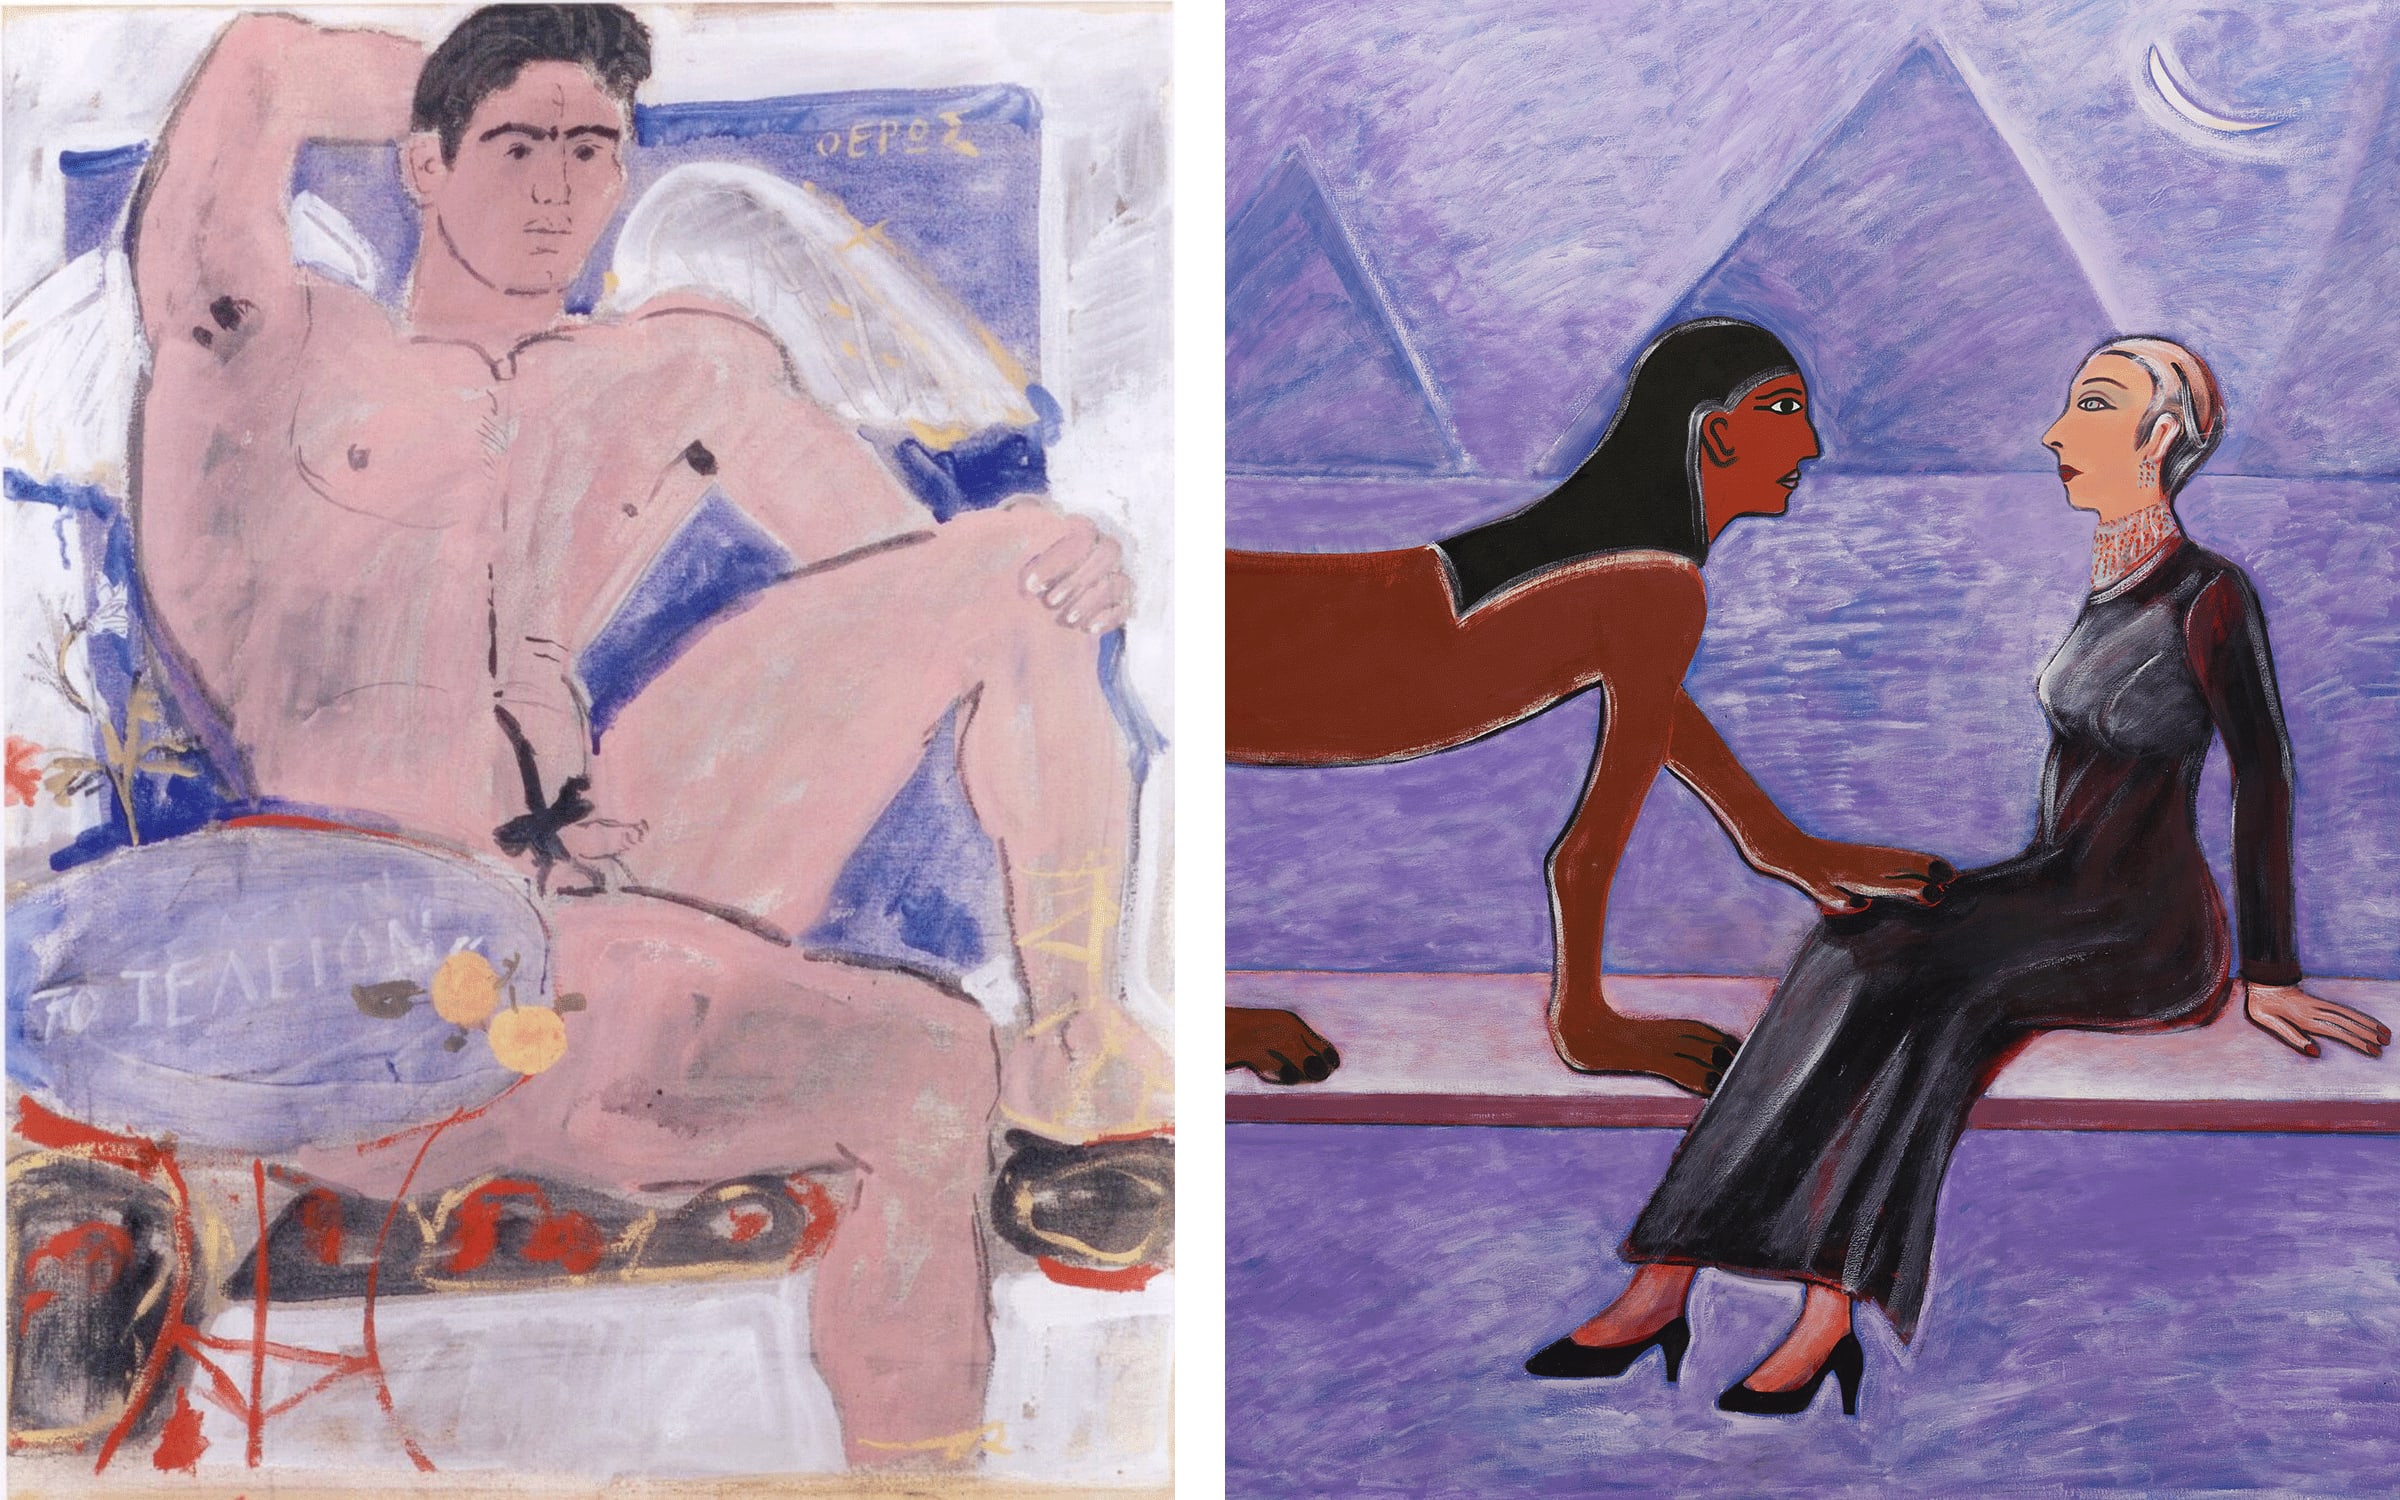 Left: Yannis Tsarouchis, To Telion, 1967 © Yannis Tsarouchis Foundation, courtesy of Blum & Poe, the Irene Panagopoulos Collection, Athens, and Kalfayan Galleries. Right: Joan Brown, Woman and Sphinx #1, 1977 © Joan Brown Estate, courtesy of the Estate, Blum & Poe, and Matthew Marks Gallery.